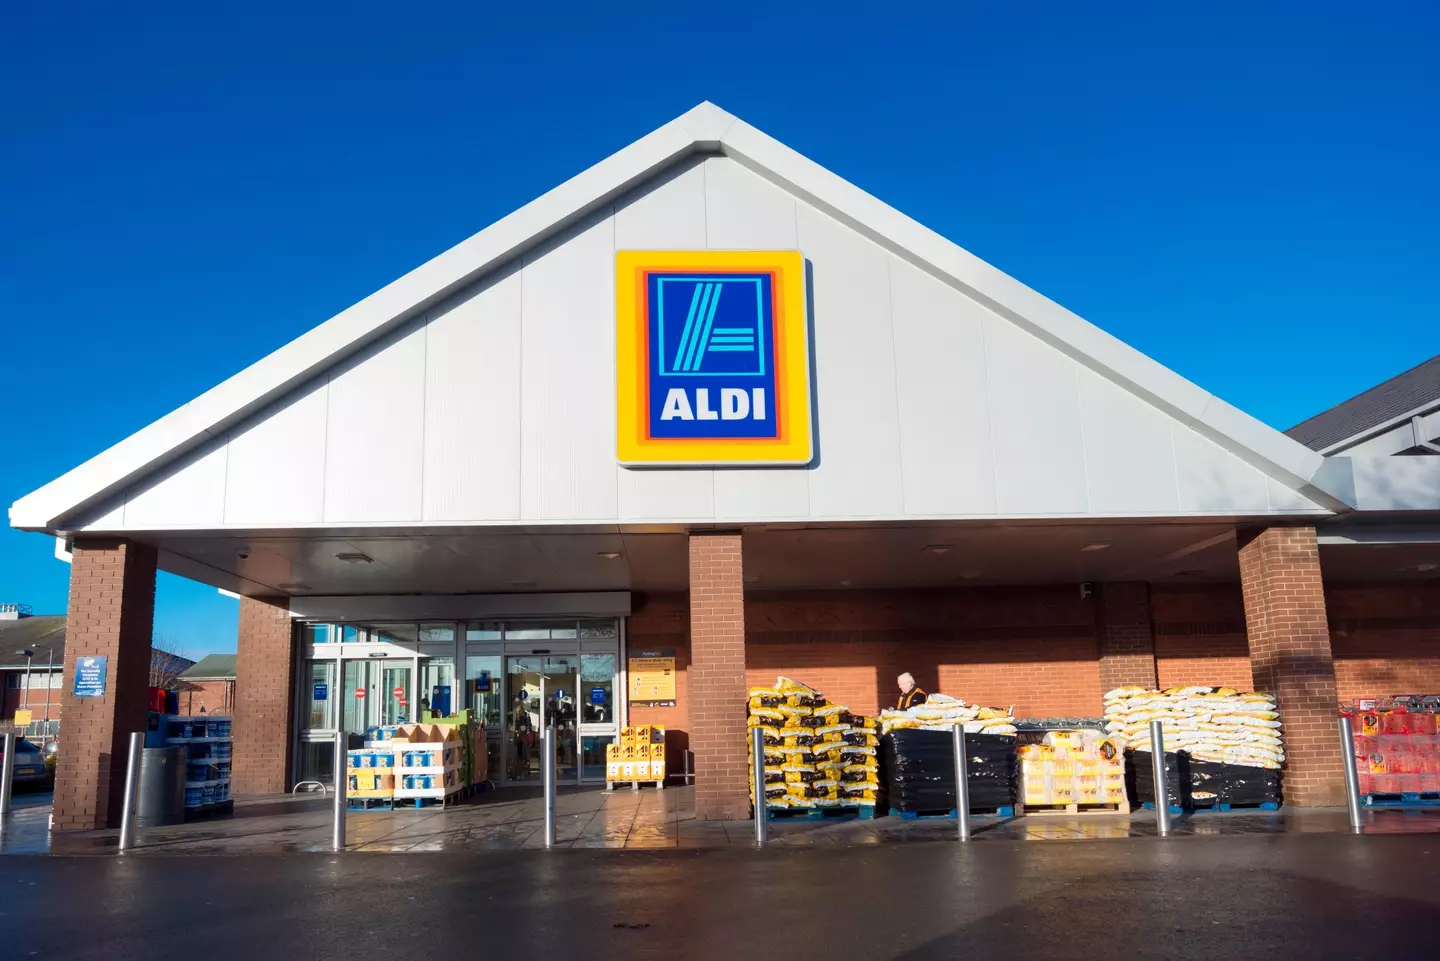 Aldi is known for it's low prices.